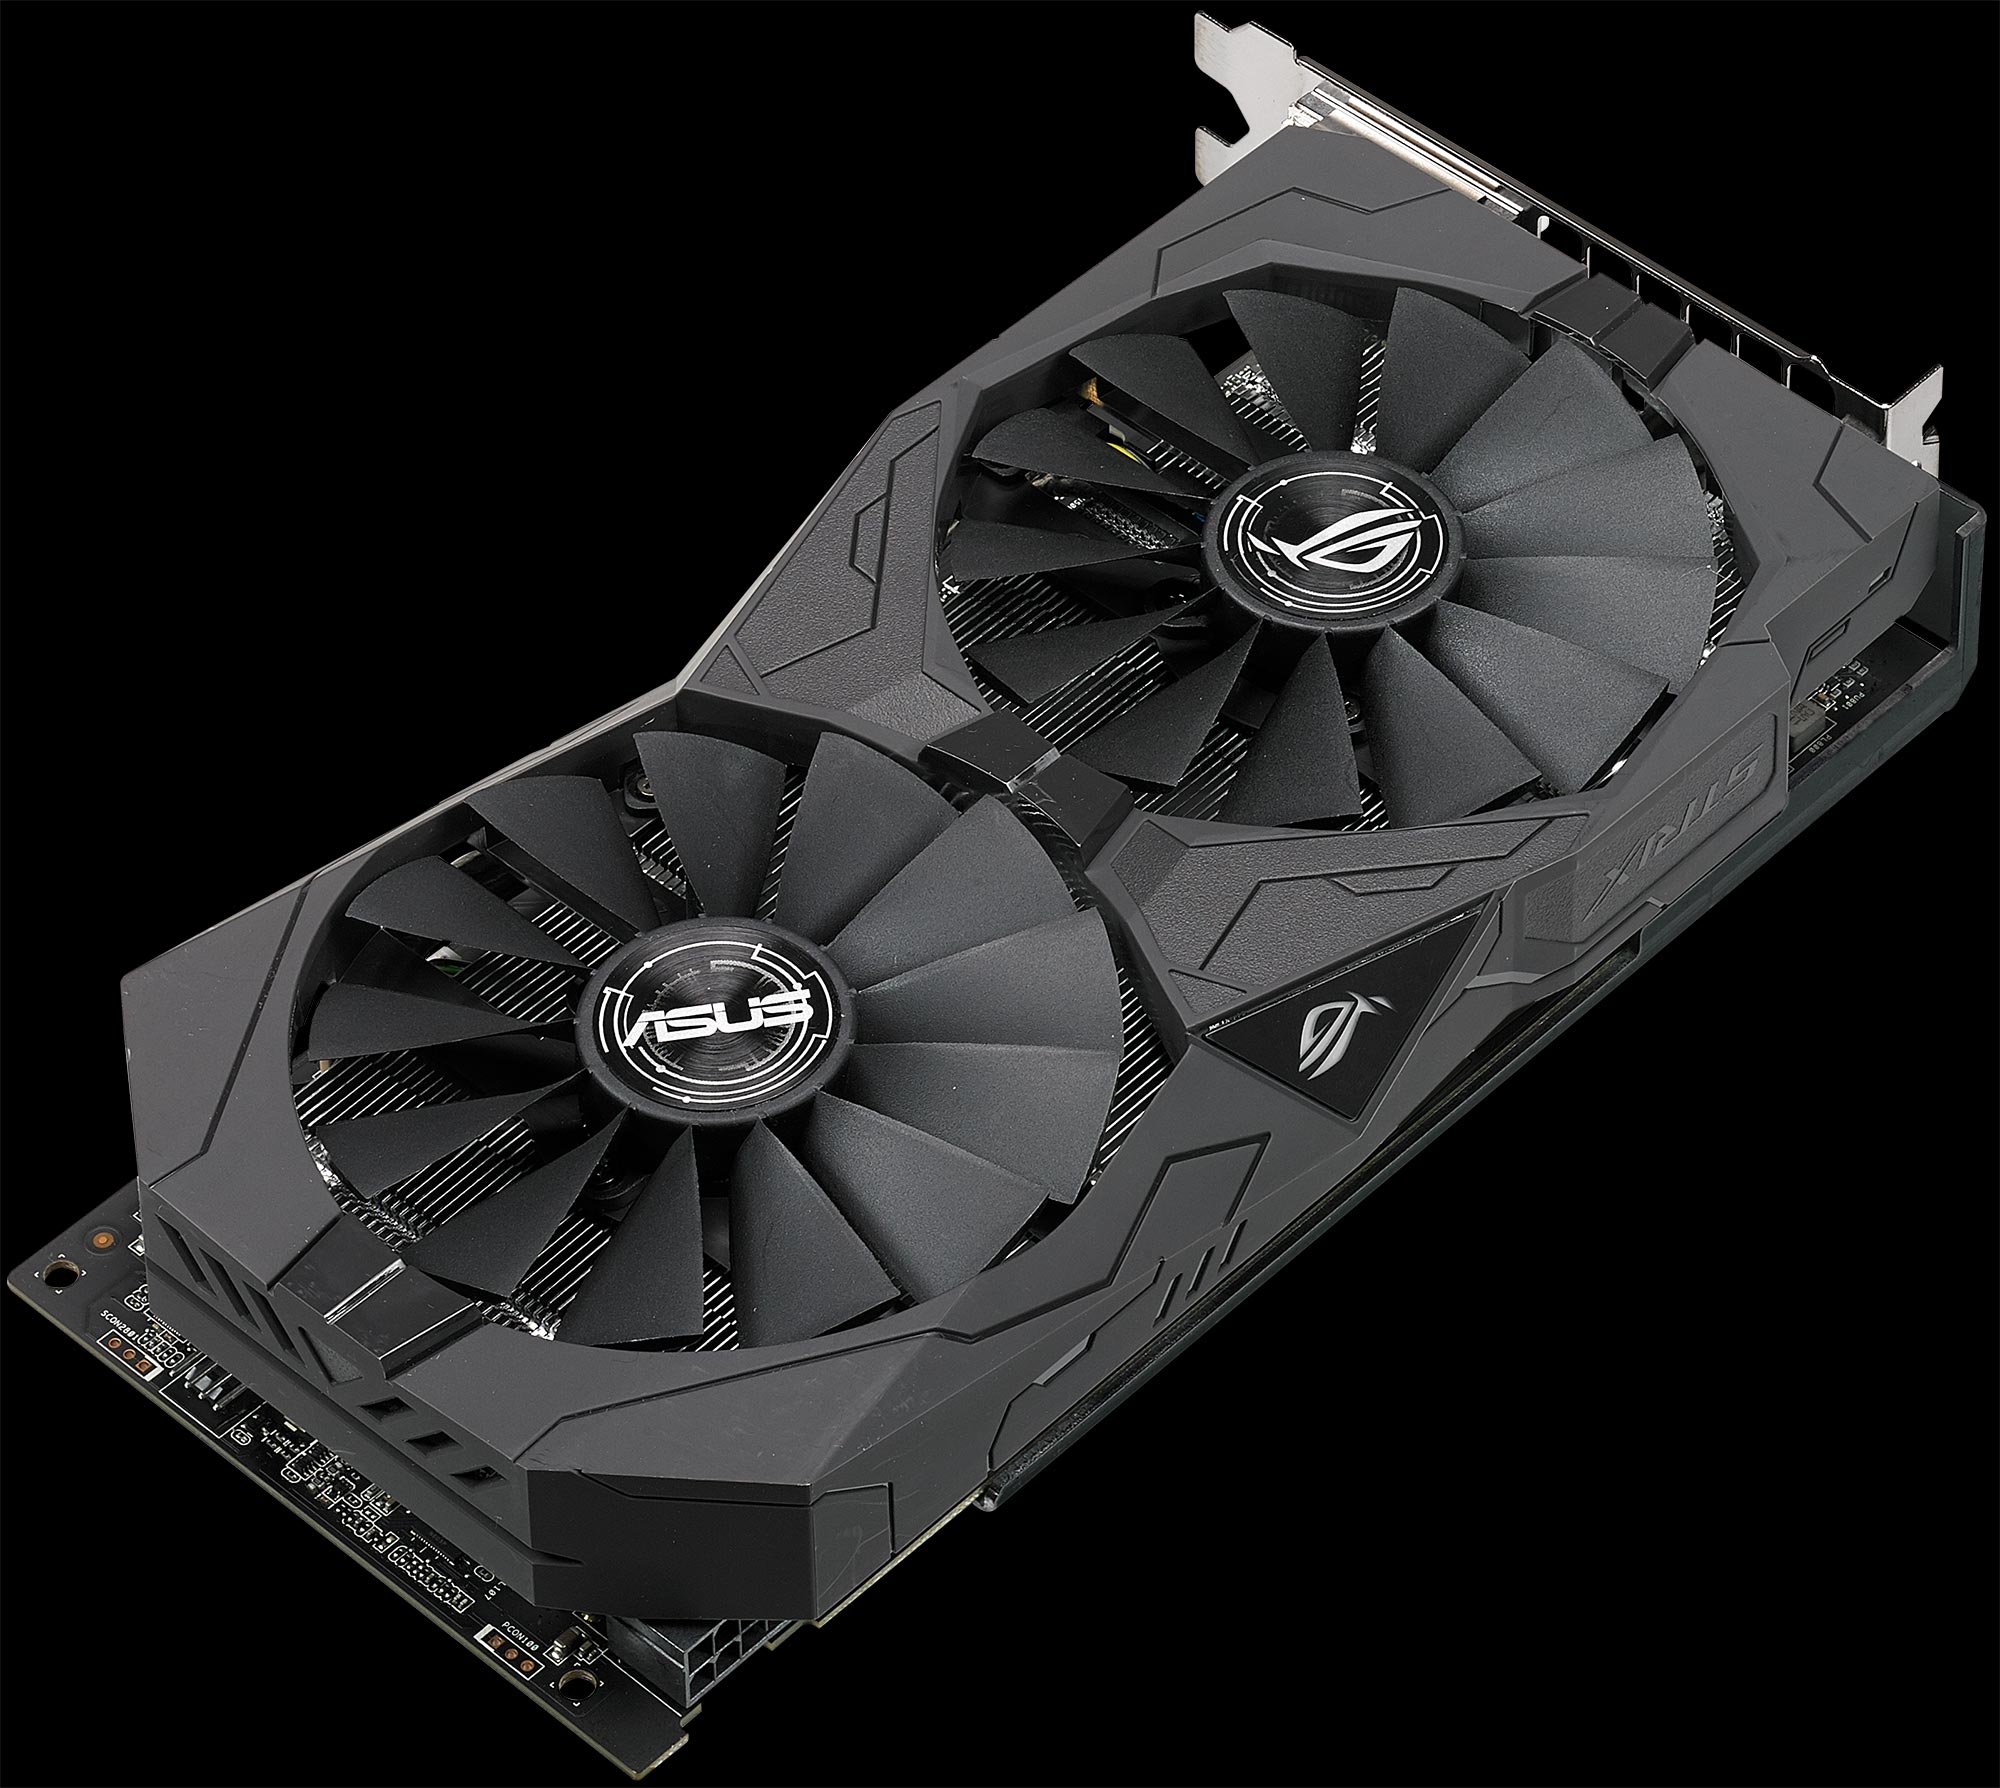 Introducing the ROG Strix Radeon RX 580 and 570 graphics cards